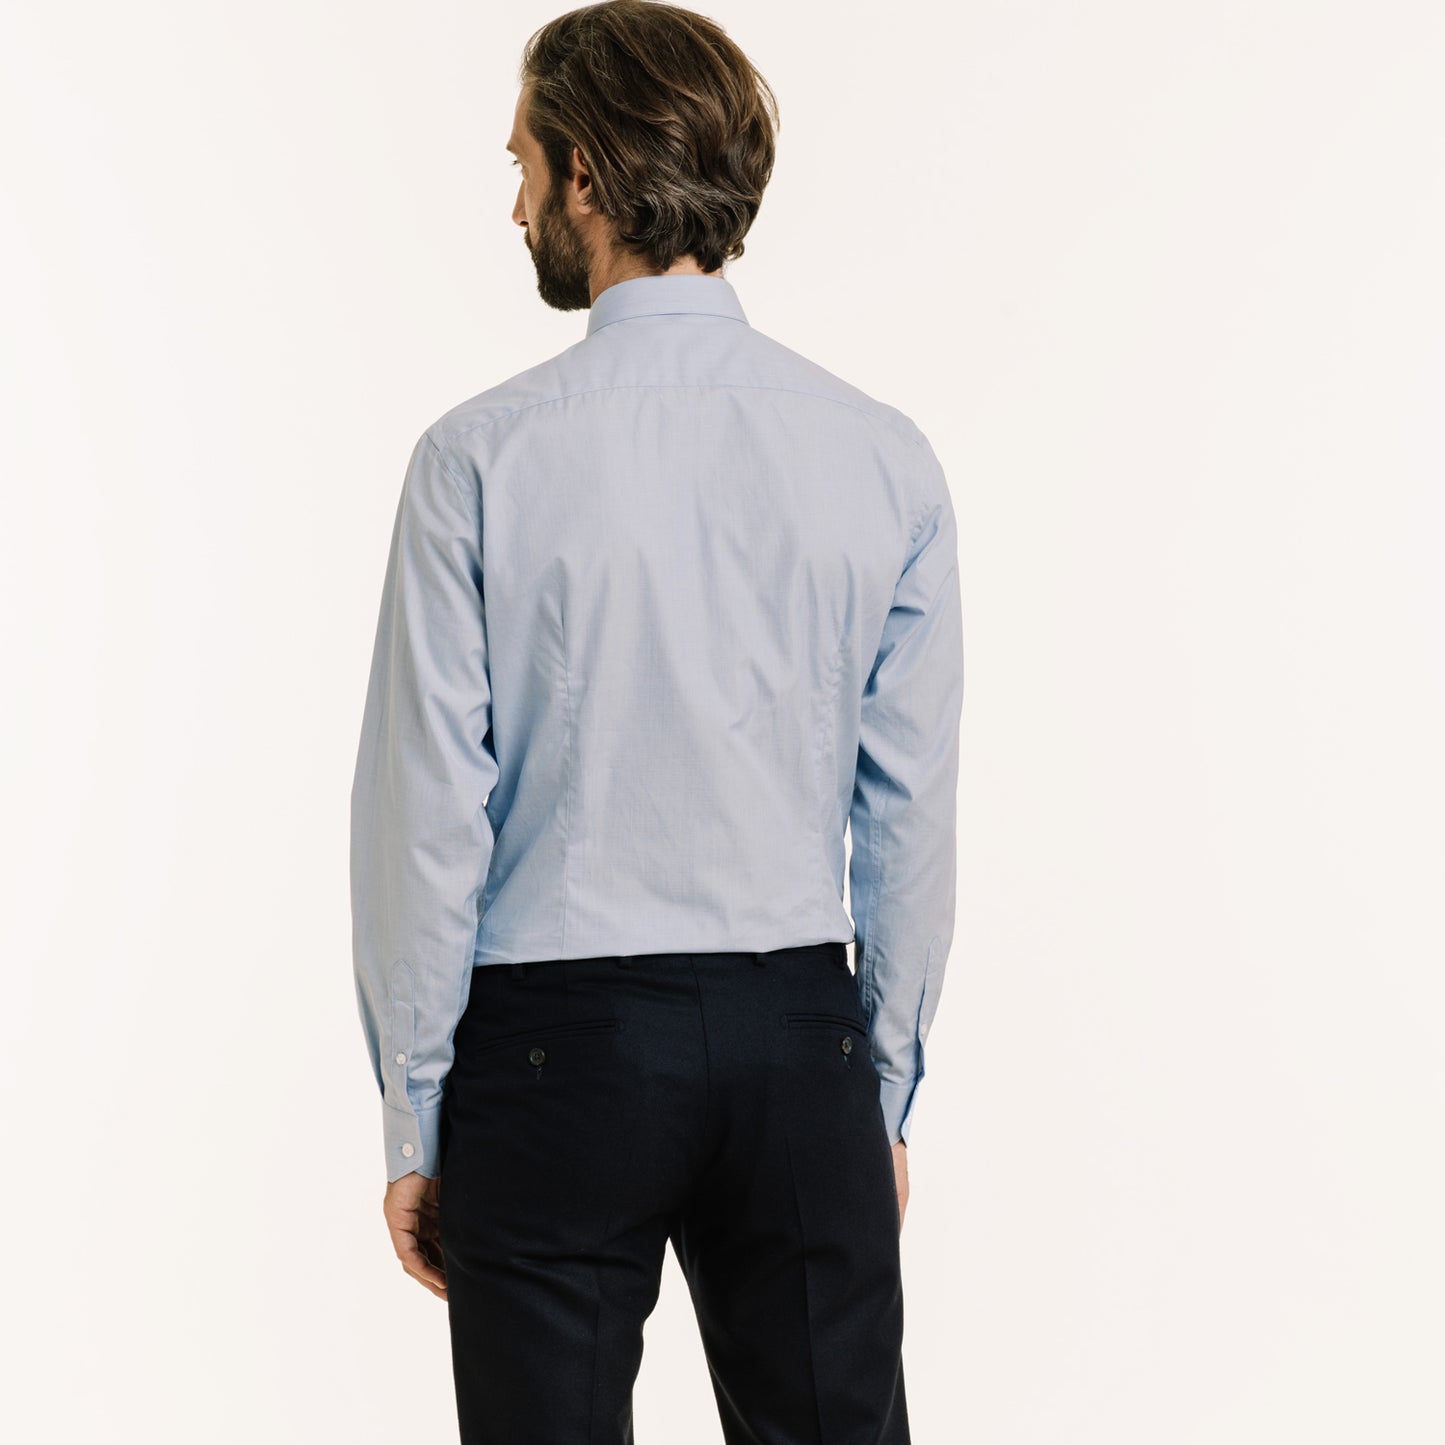 Blue double-twisted fil-à-fil fitted shirt